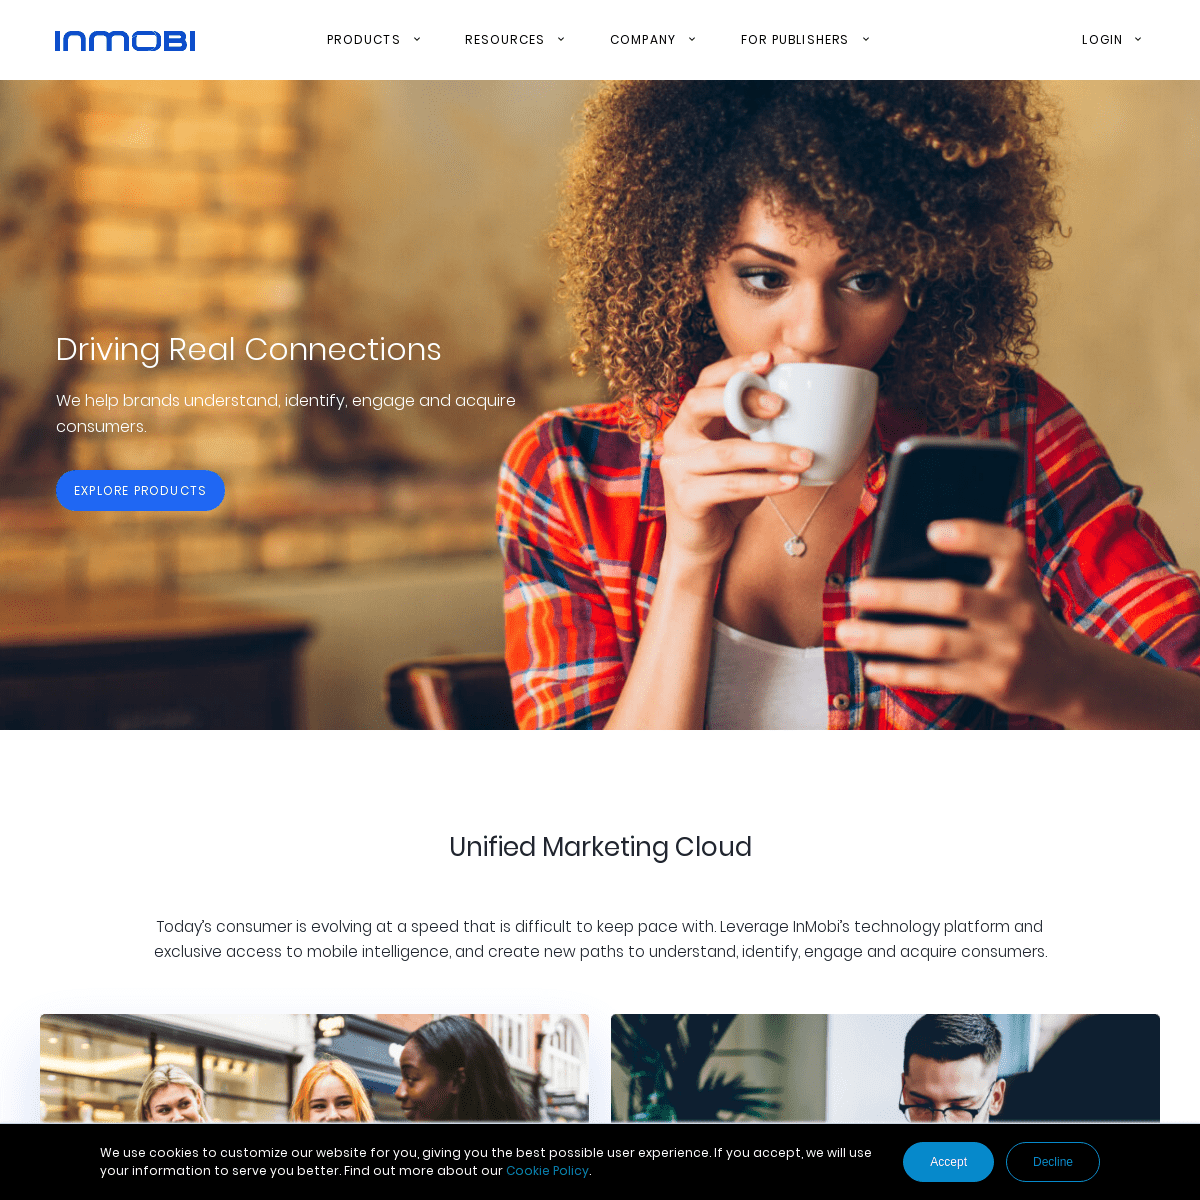 InMobi | Unified Marketing Cloud for Driving Real Connections